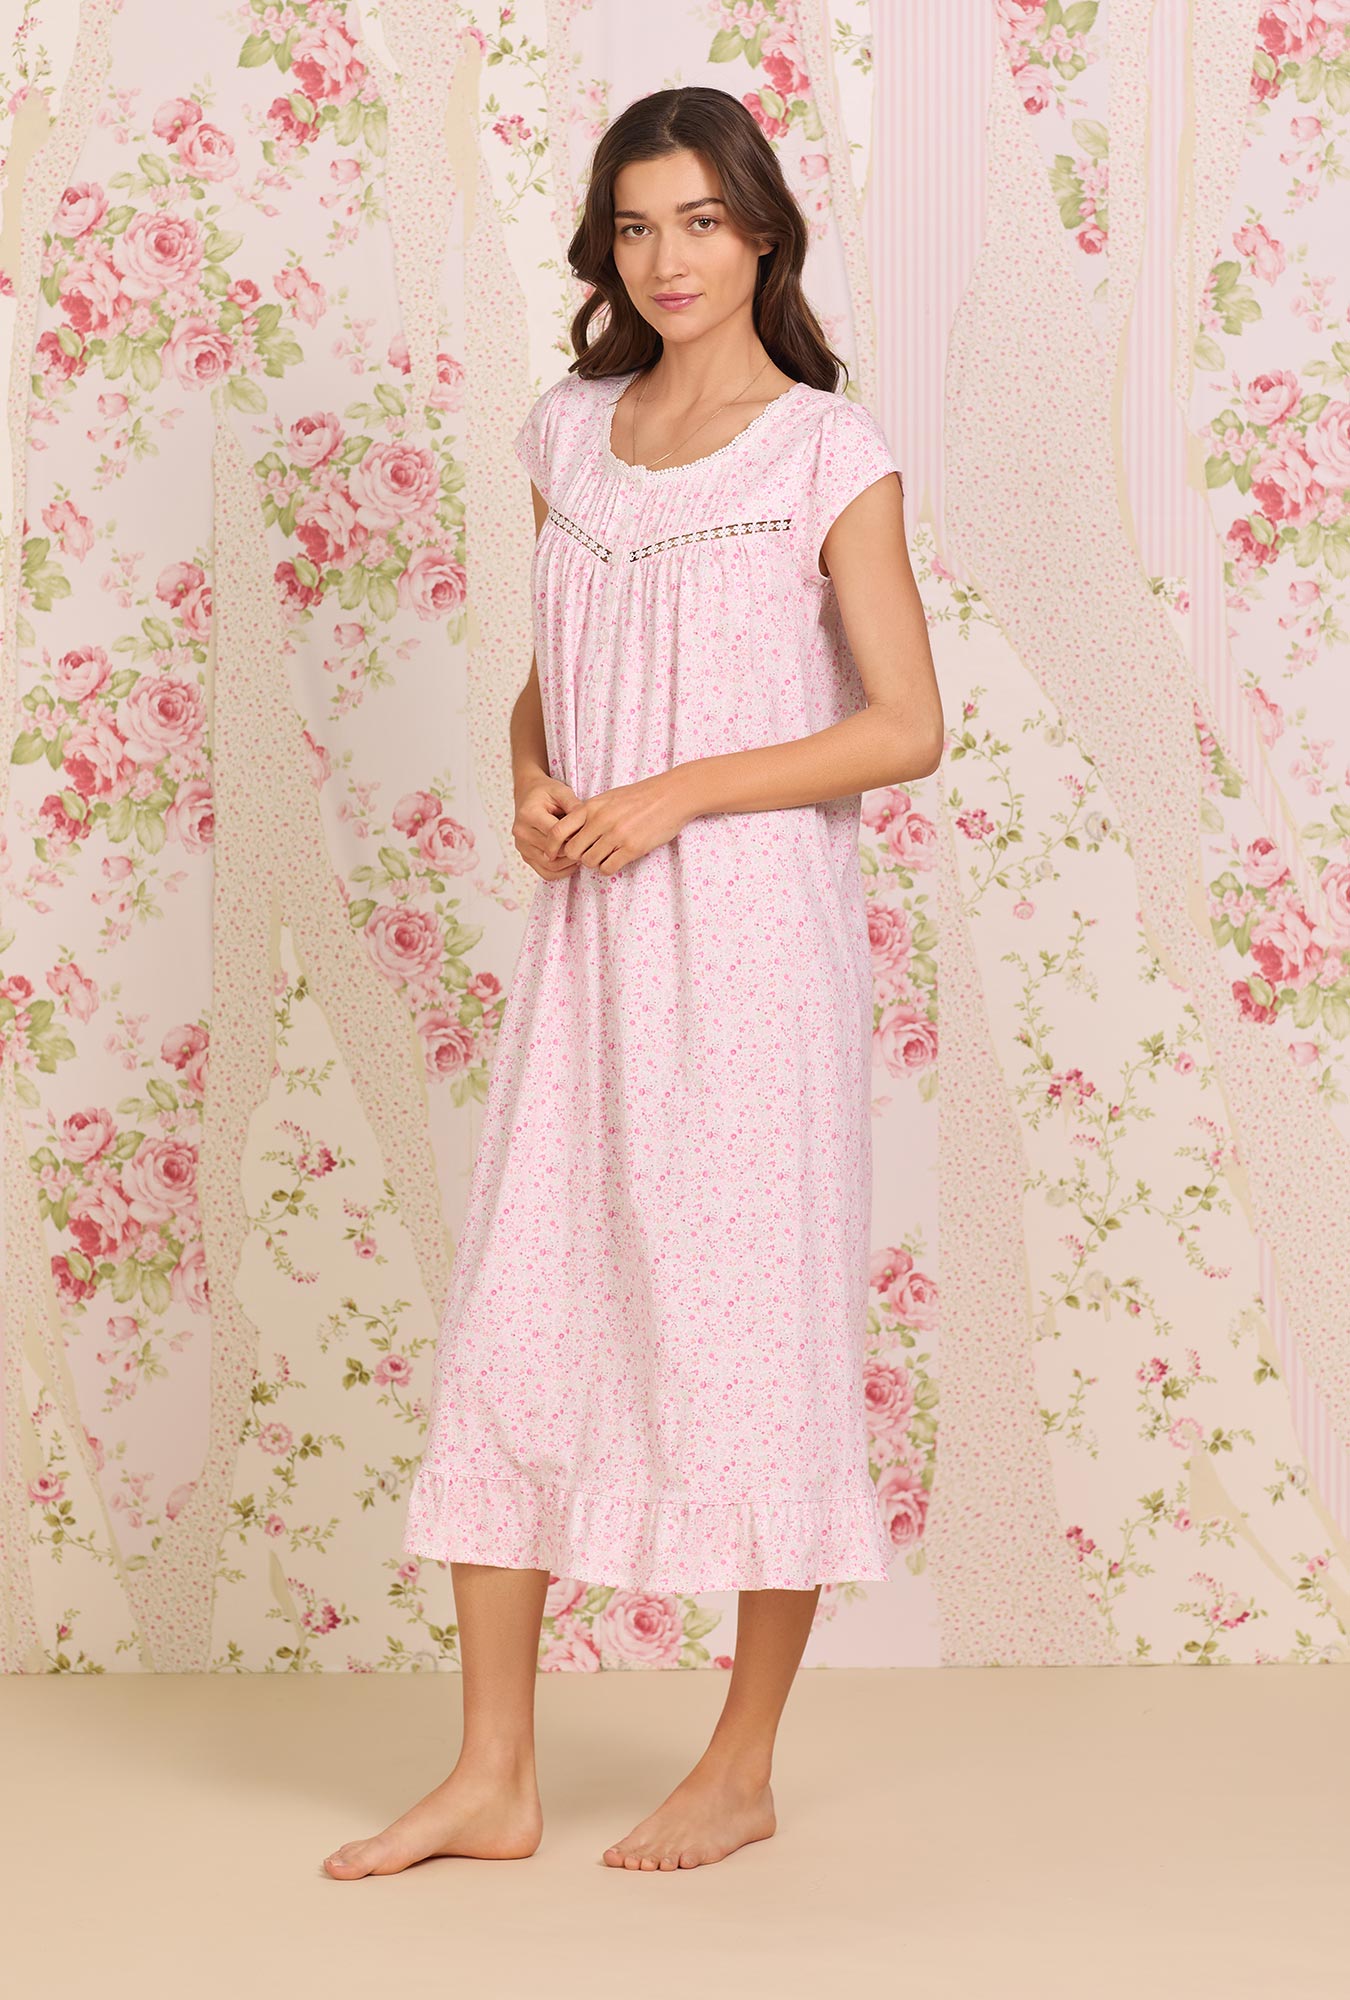  A lady wearing pink Cotton Knit Long Cap Sleeve Nightgown with spring garden print